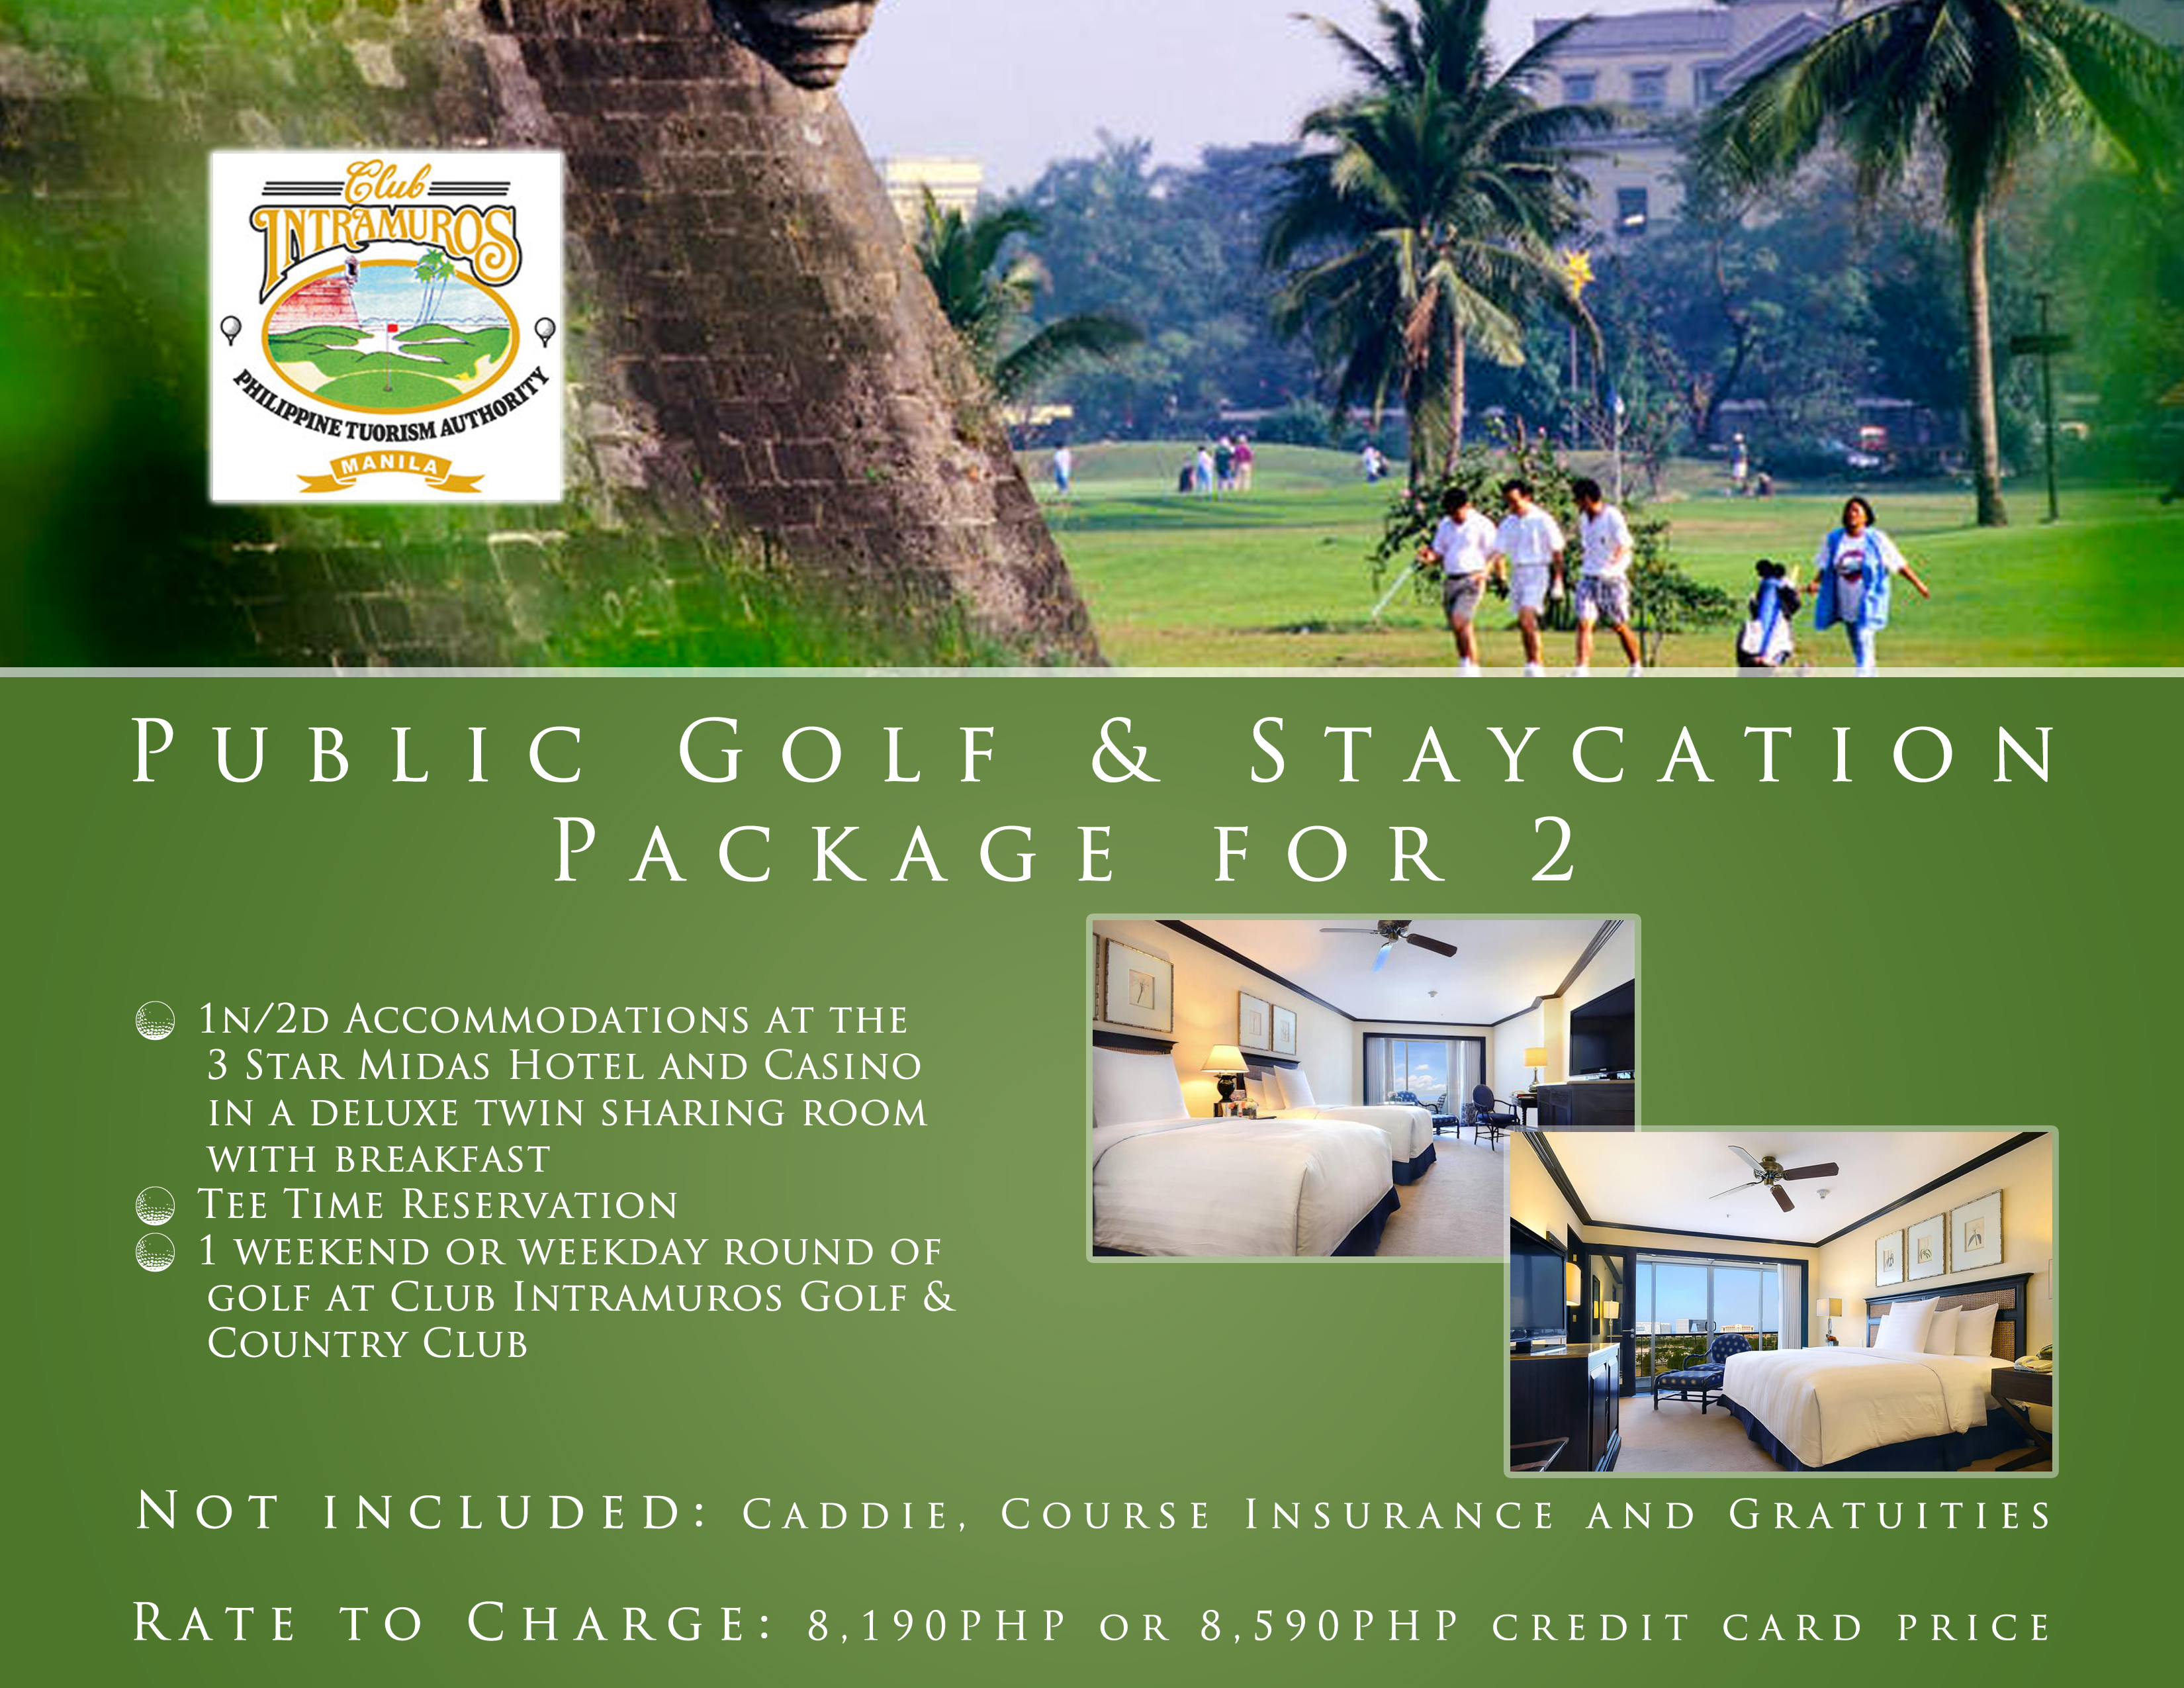 Offer #10 - Public Golf & Staycation Package for 2